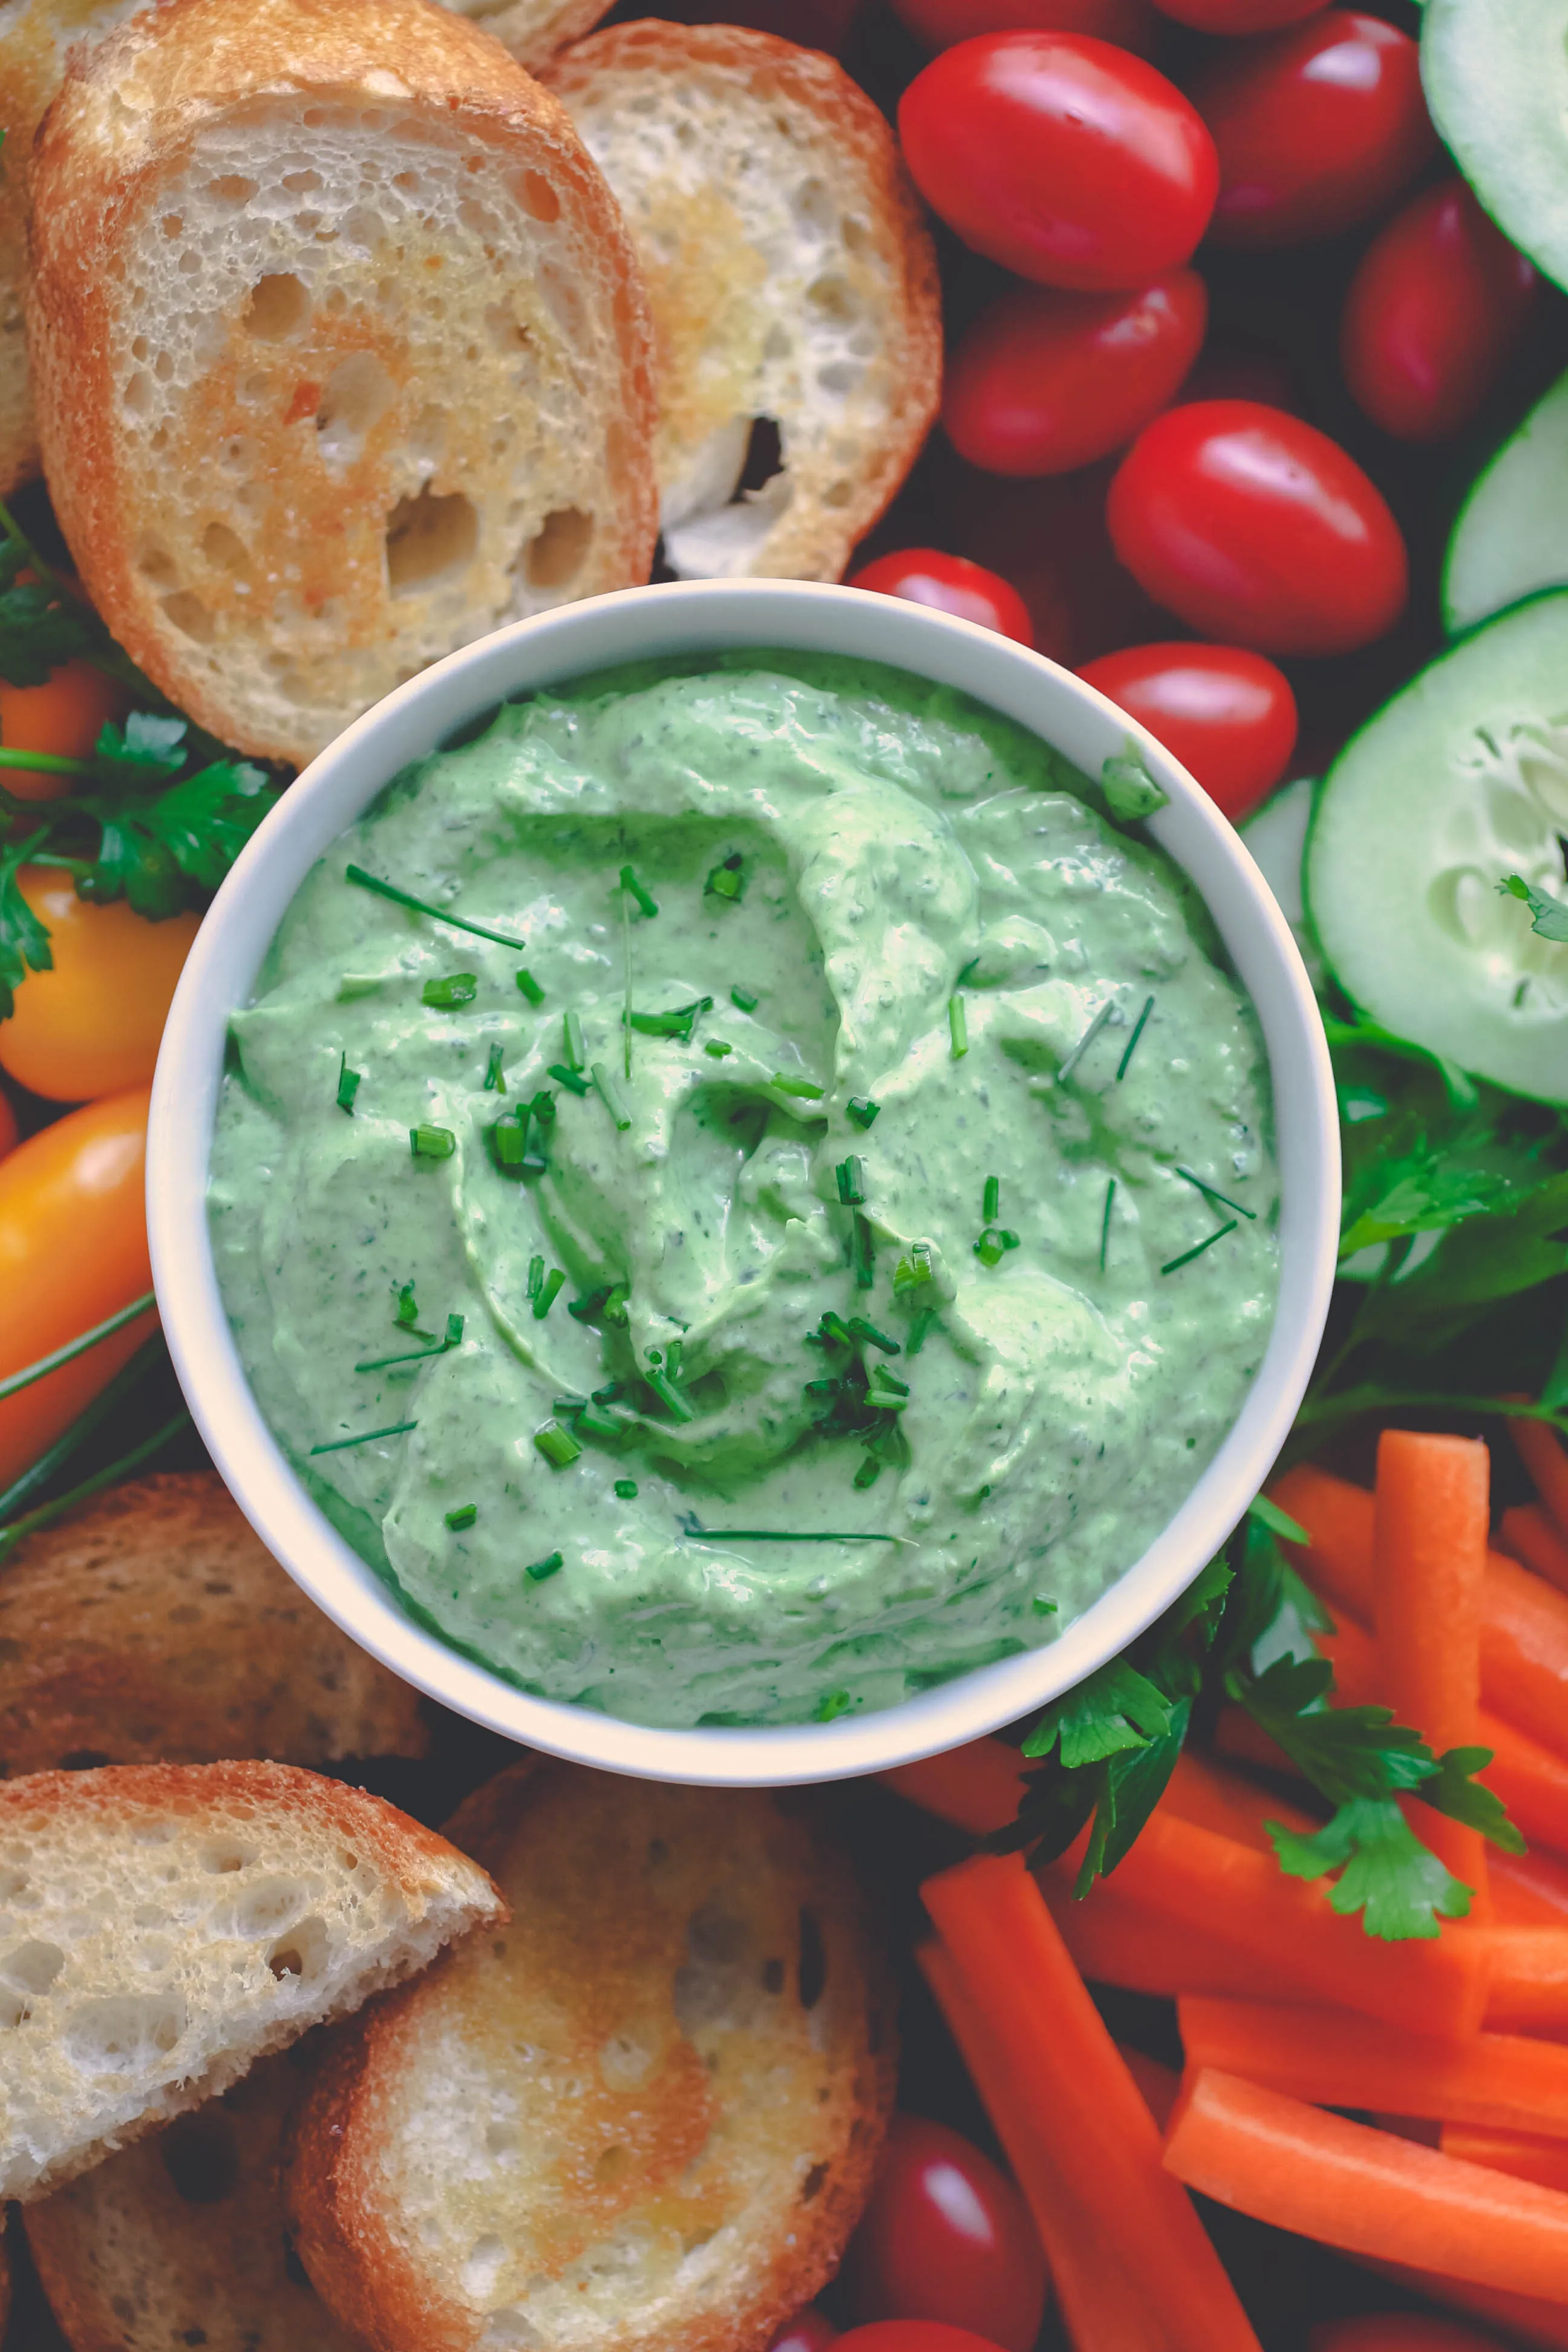 Creamy Green Goddess Dip makes a great after school snack or game day dip! Creamy Green Goddess Dip is easy to make and full of fresh flavors!